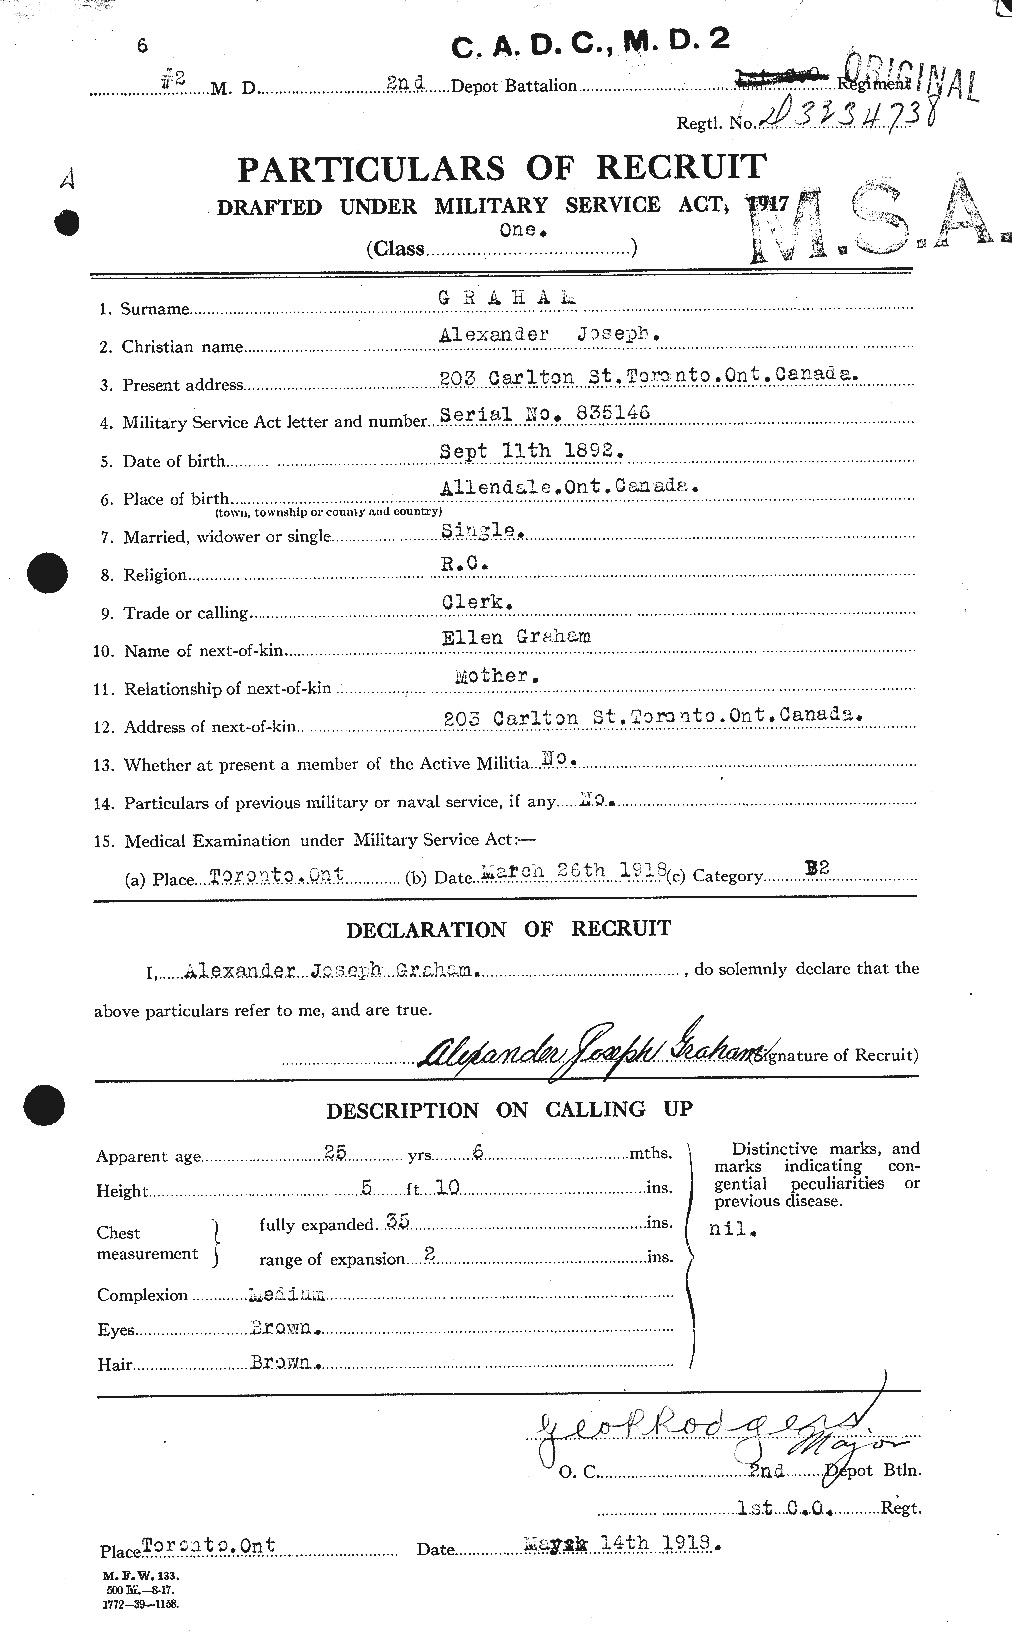 Personnel Records of the First World War - CEF 359593a